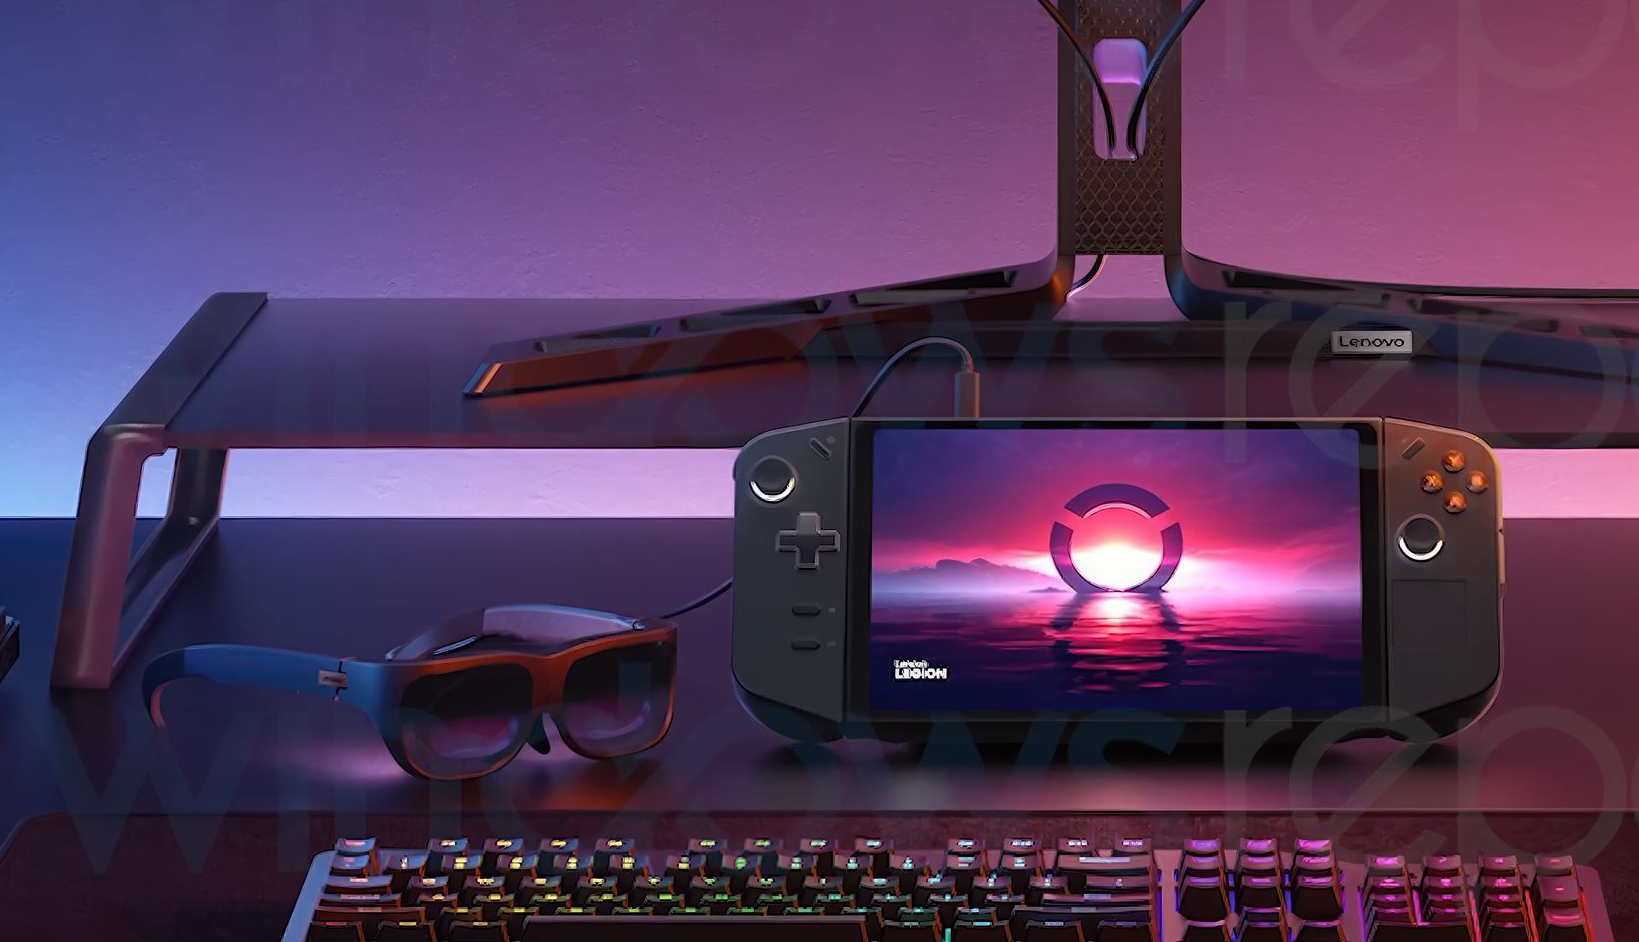 More ASUS ROG Ally Details Revealed in Prototype Video